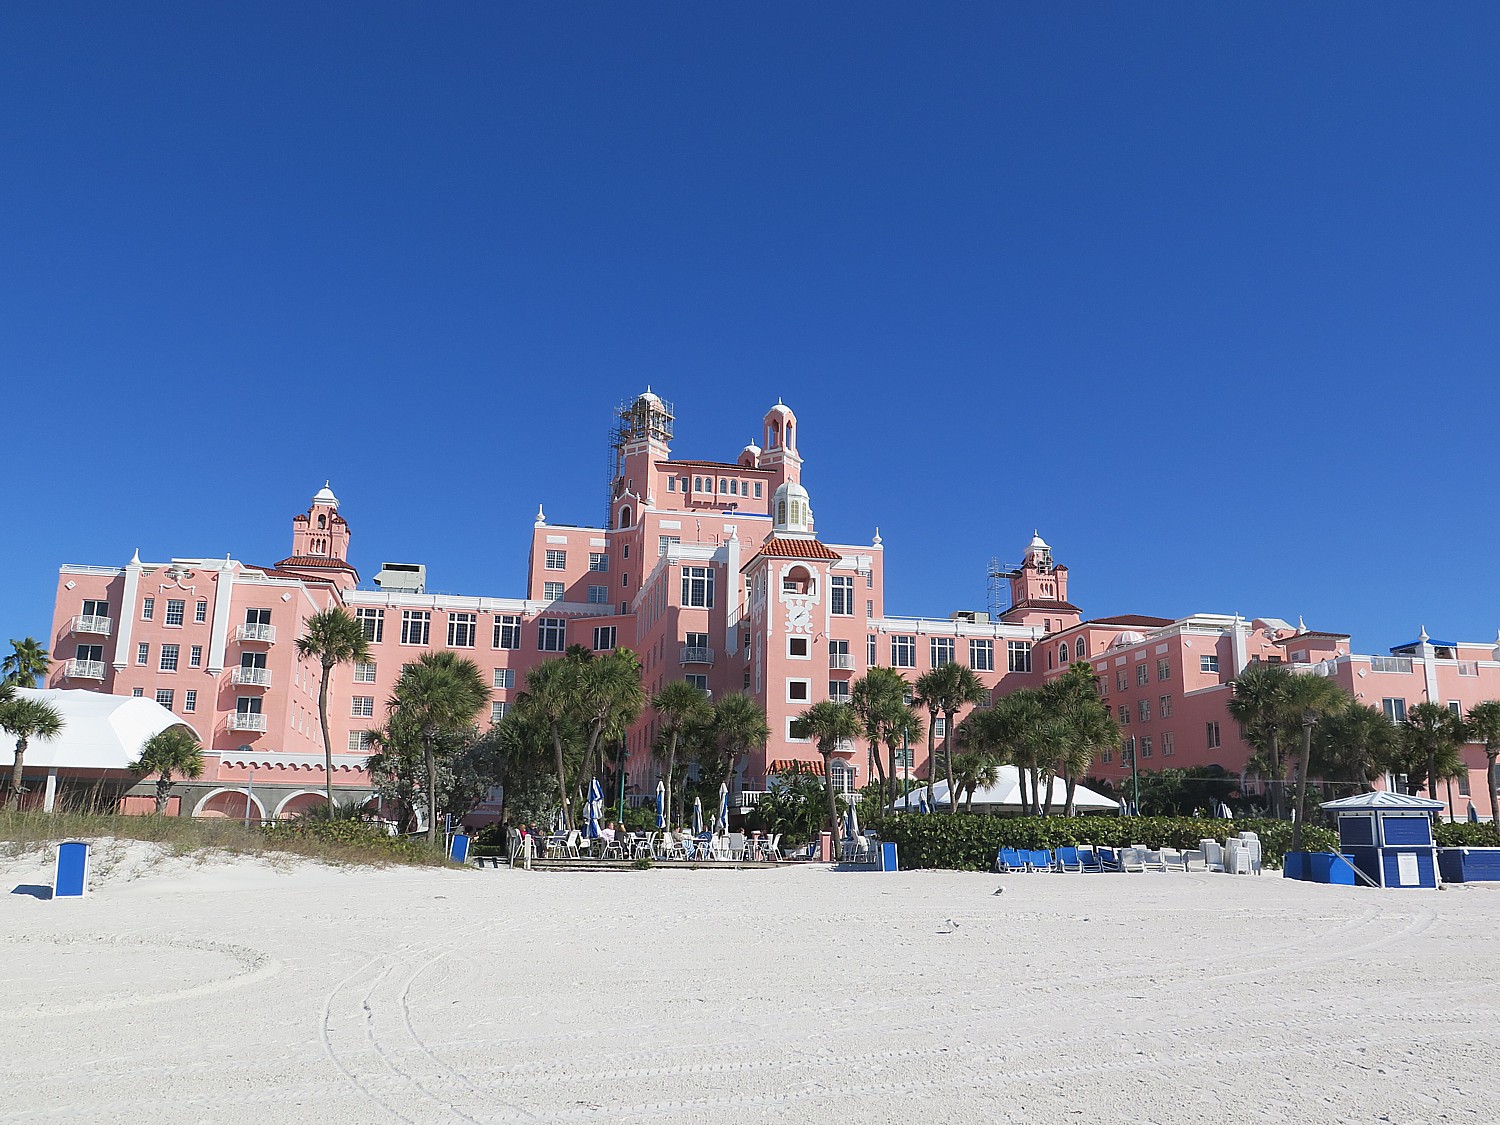 Loews Don CeSar Hotel (1928), the famous “Pink Lady” of  St. Pete Beach, Florida, is a finalist for Best Social Media of a Historic Hotel © 2016 Karen Rubin/goingplacesfarandnear.com 